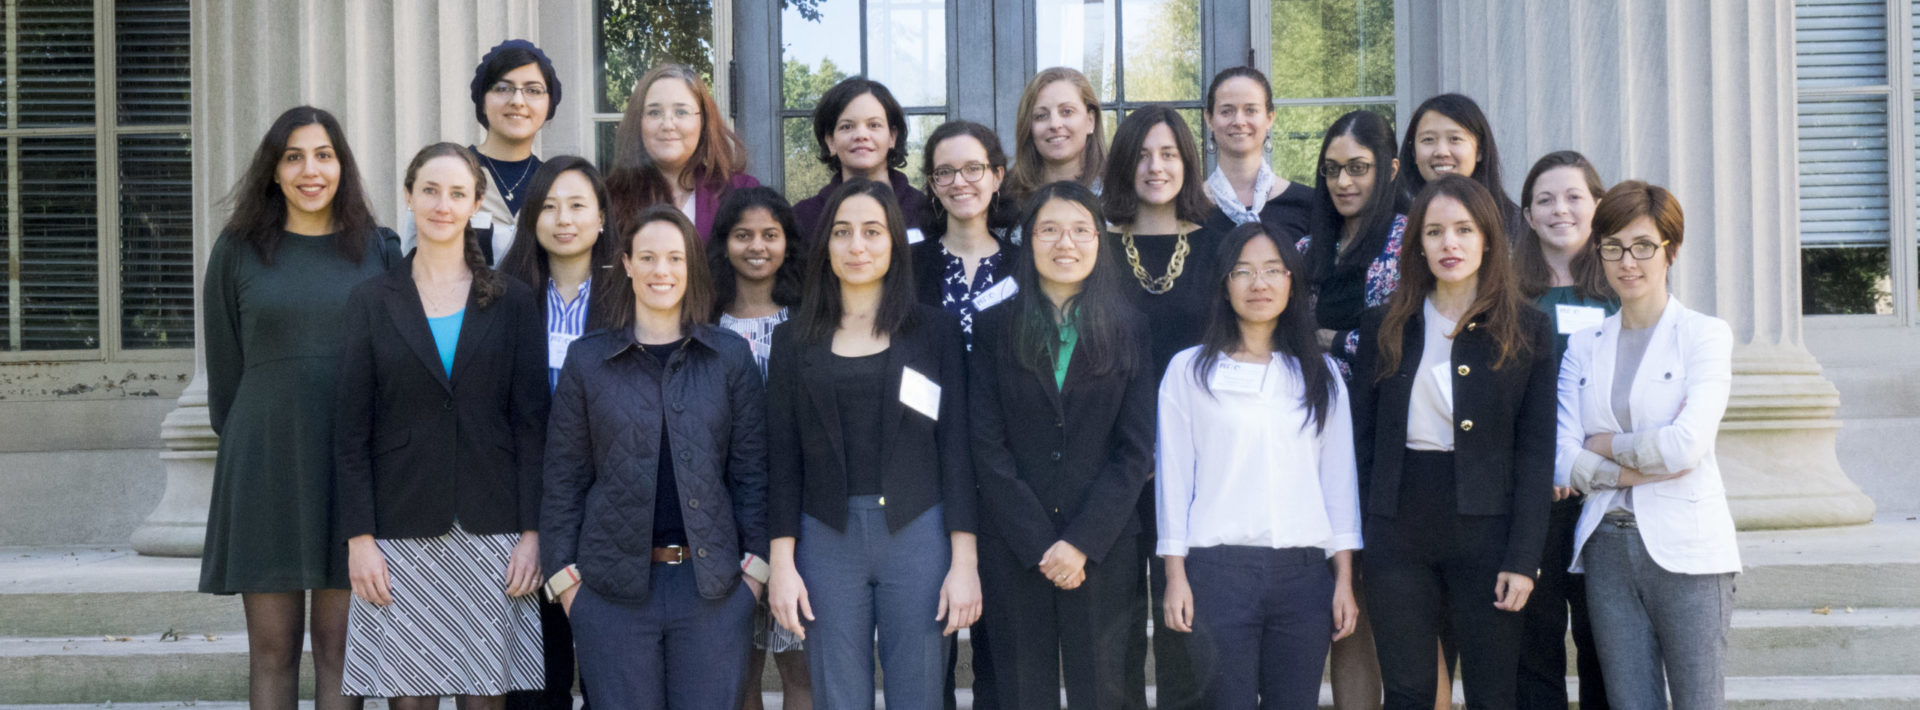 CEE Rising Stars Workshop brings distinguished early-career women to campus